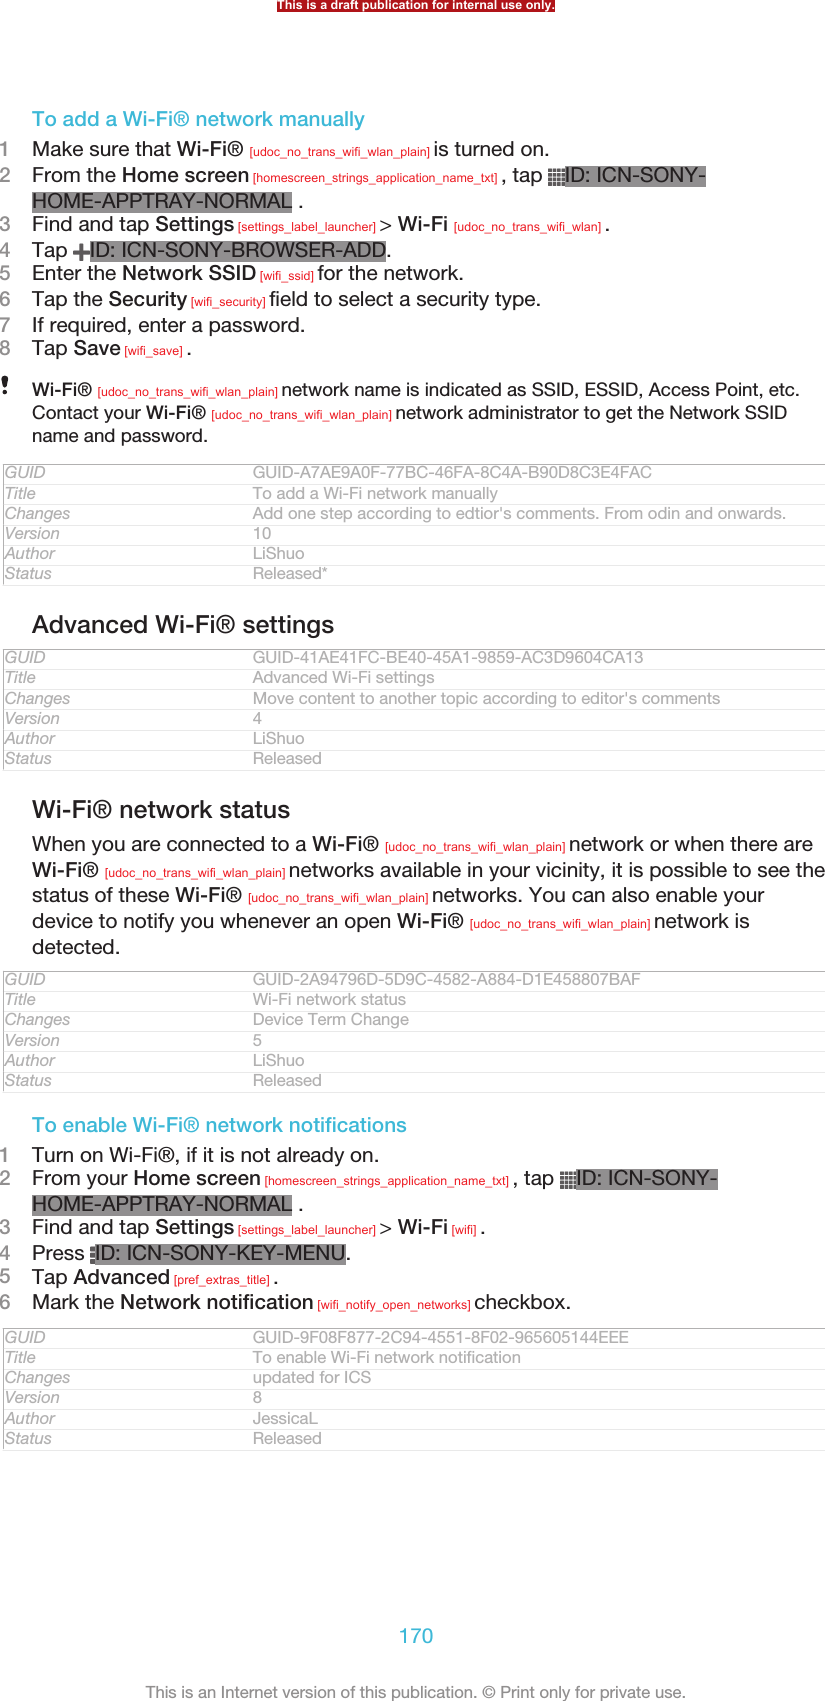 To add a Wi-Fi® network manually1Make sure that Wi-Fi® [udoc_no_trans_wifi_wlan_plain] is turned on.2From the Home screen [homescreen_strings_application_name_txt] , tap  ID: ICN-SONY-HOME-APPTRAY-NORMAL .3Find and tap Settings [settings_label_launcher] &gt; Wi-Fi [udoc_no_trans_wifi_wlan] .4Tap  ID: ICN-SONY-BROWSER-ADD.5Enter the Network SSID [wifi_ssid] for the network.6Tap the Security [wifi_security] field to select a security type.7If required, enter a password.8Tap Save [wifi_save] .Wi-Fi® [udoc_no_trans_wifi_wlan_plain] network name is indicated as SSID, ESSID, Access Point, etc.Contact your Wi-Fi® [udoc_no_trans_wifi_wlan_plain] network administrator to get the Network SSIDname and password.GUID GUID-A7AE9A0F-77BC-46FA-8C4A-B90D8C3E4FACTitle To add a Wi-Fi network manuallyChanges Add one step according to edtior&apos;s comments. From odin and onwards.Version 10Author LiShuoStatus Released*Advanced Wi-Fi® settingsGUID GUID-41AE41FC-BE40-45A1-9859-AC3D9604CA13Title Advanced Wi-Fi settingsChanges Move content to another topic according to editor&apos;s commentsVersion 4Author LiShuoStatus ReleasedWi-Fi® network statusWhen you are connected to a Wi-Fi® [udoc_no_trans_wifi_wlan_plain] network or when there areWi-Fi® [udoc_no_trans_wifi_wlan_plain] networks available in your vicinity, it is possible to see thestatus of these Wi-Fi® [udoc_no_trans_wifi_wlan_plain] networks. You can also enable yourdevice to notify you whenever an open Wi-Fi® [udoc_no_trans_wifi_wlan_plain] network isdetected.GUID GUID-2A94796D-5D9C-4582-A884-D1E458807BAFTitle Wi-Fi network statusChanges Device Term ChangeVersion 5Author LiShuoStatus ReleasedTo enable Wi-Fi® network notifications1Turn on Wi-Fi®, if it is not already on.2From your Home screen [homescreen_strings_application_name_txt] , tap  ID: ICN-SONY-HOME-APPTRAY-NORMAL .3Find and tap Settings [settings_label_launcher] &gt; Wi-Fi [wifi] .4Press  ID: ICN-SONY-KEY-MENU.5Tap Advanced [pref_extras_title] .6Mark the Network notification [wifi_notify_open_networks] checkbox.GUID GUID-9F08F877-2C94-4551-8F02-965605144EEETitle To enable Wi-Fi network notificationChanges updated for ICSVersion 8Author JessicaLStatus ReleasedThis is a draft publication for internal use only.170This is an Internet version of this publication. © Print only for private use.